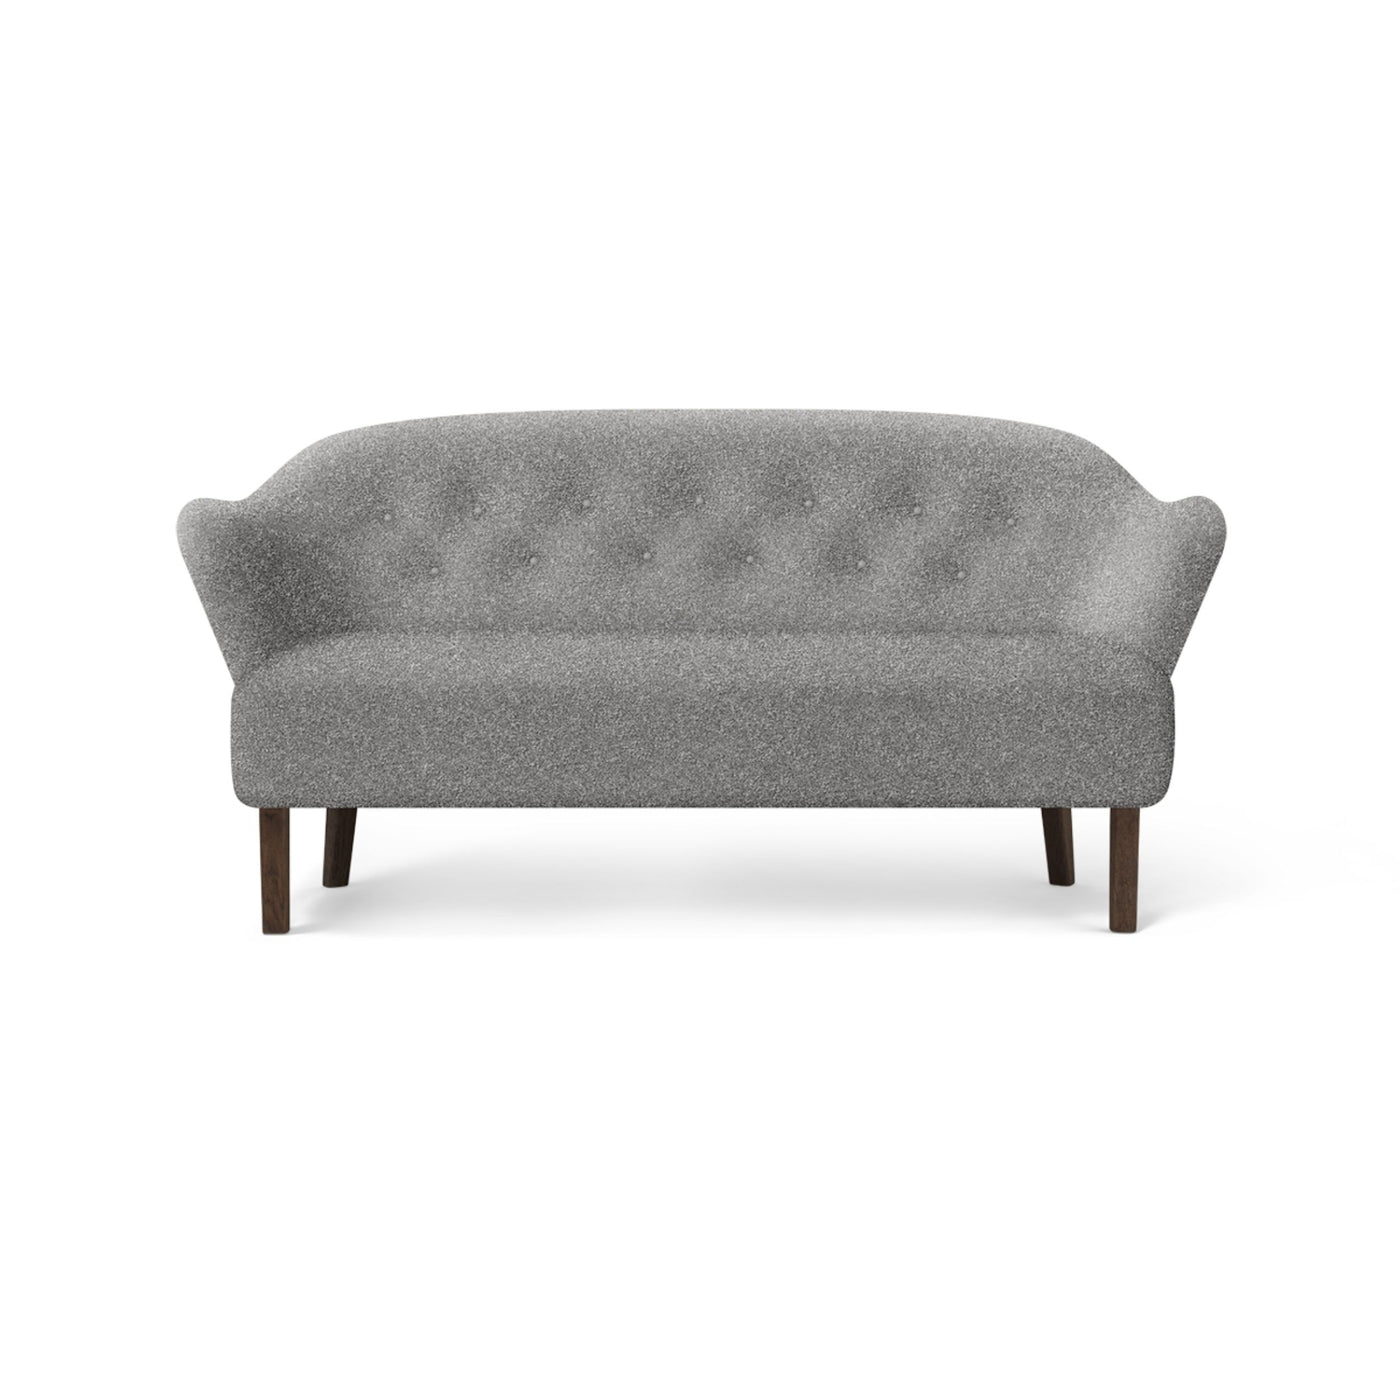 By Lassen Ingeborg sofa with smoked oak legs. Made to order from someday designs. #colour_sahco-zero-12